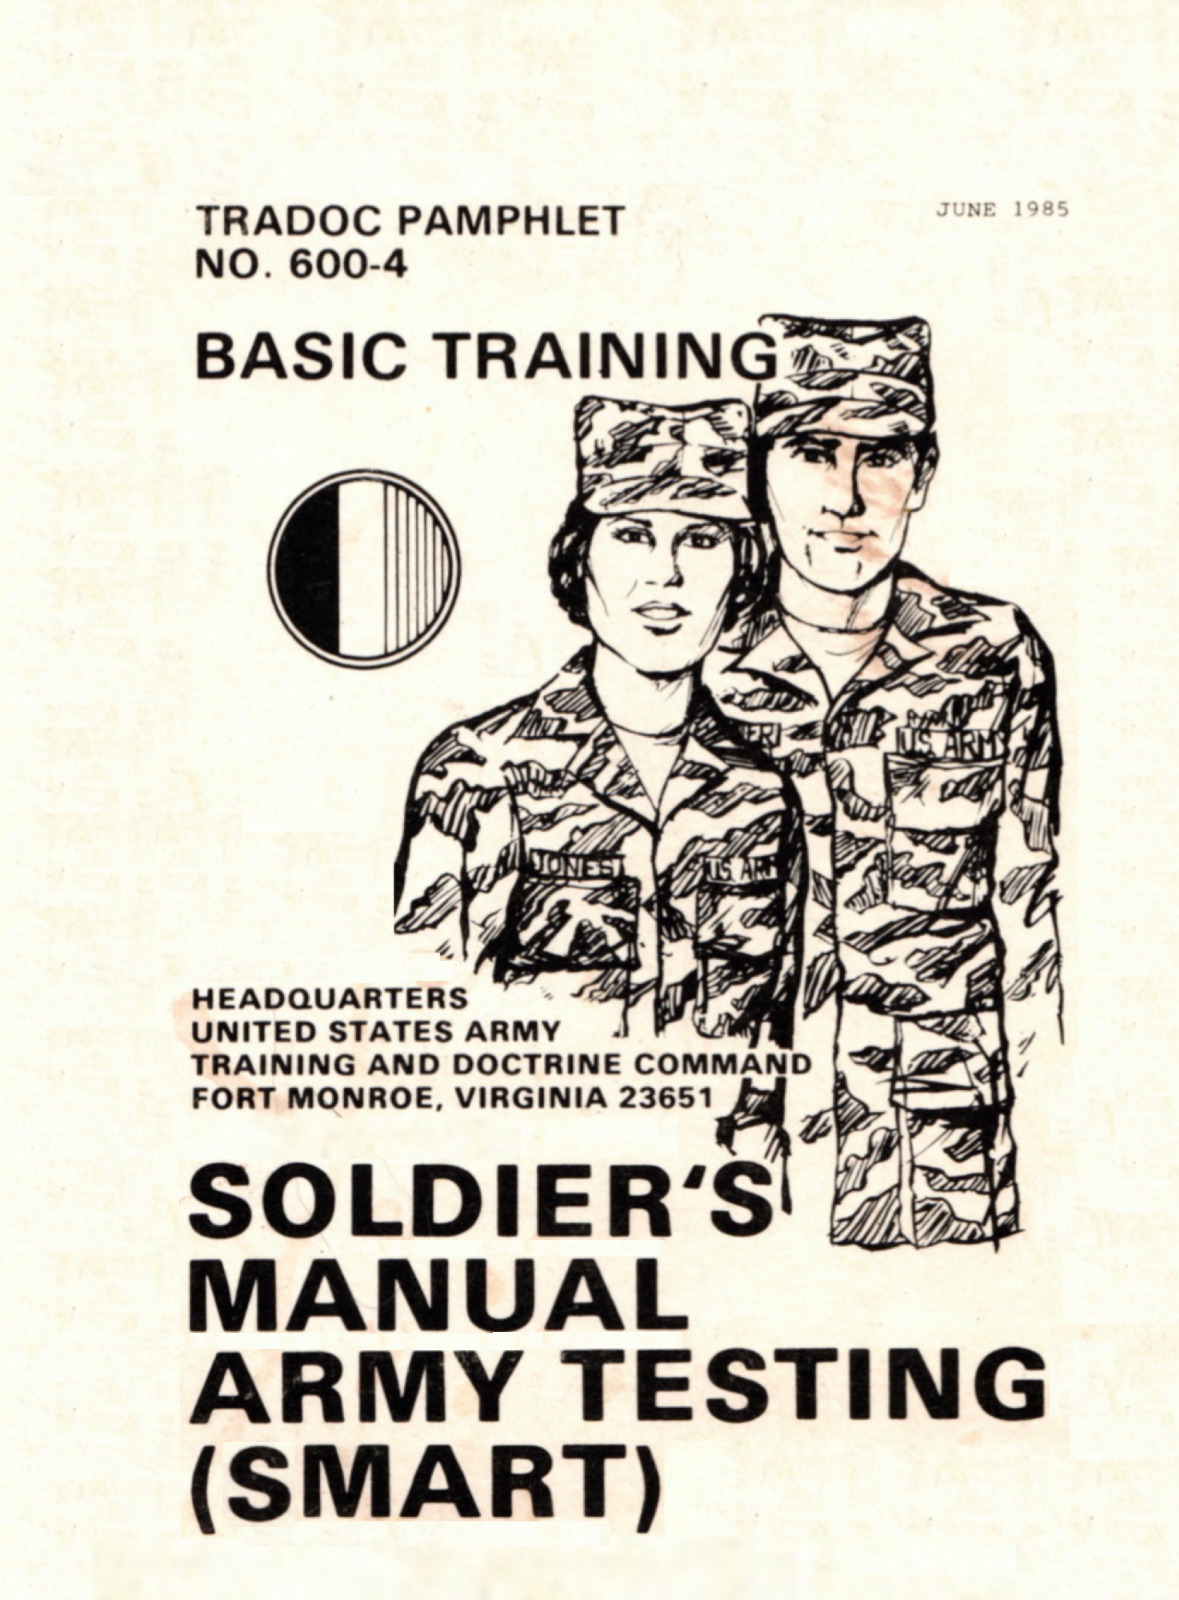 148 Page June 1985 BASIC TRAINING SOLDIER'S MANUAL ARMY TESTING SMART on Data CD